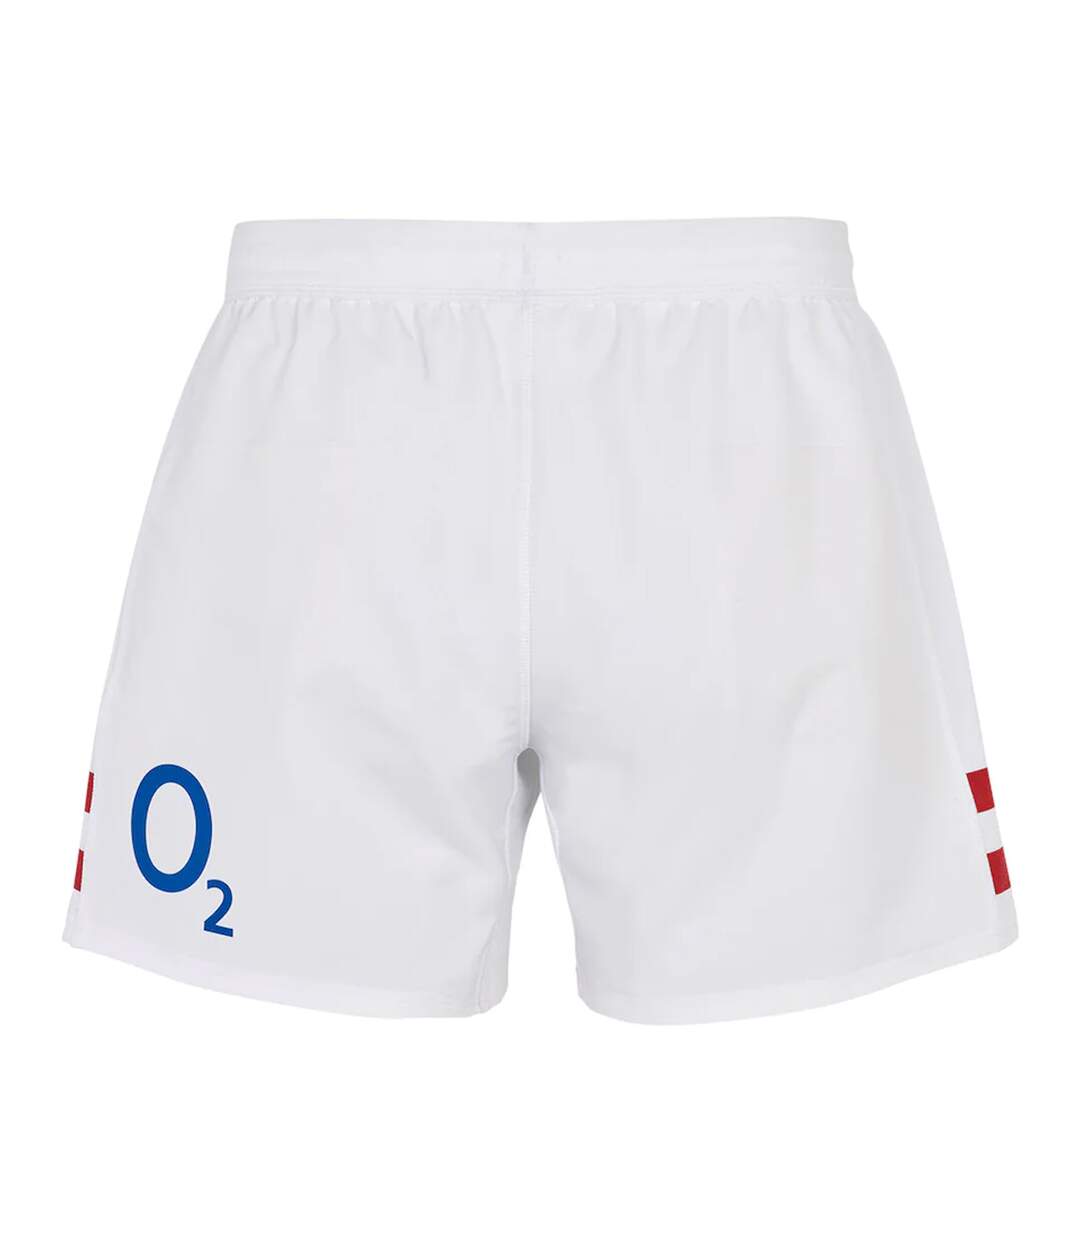 England Rugby - Short domicile 22/23 PRO - Homme (Blanc) - UTUO511